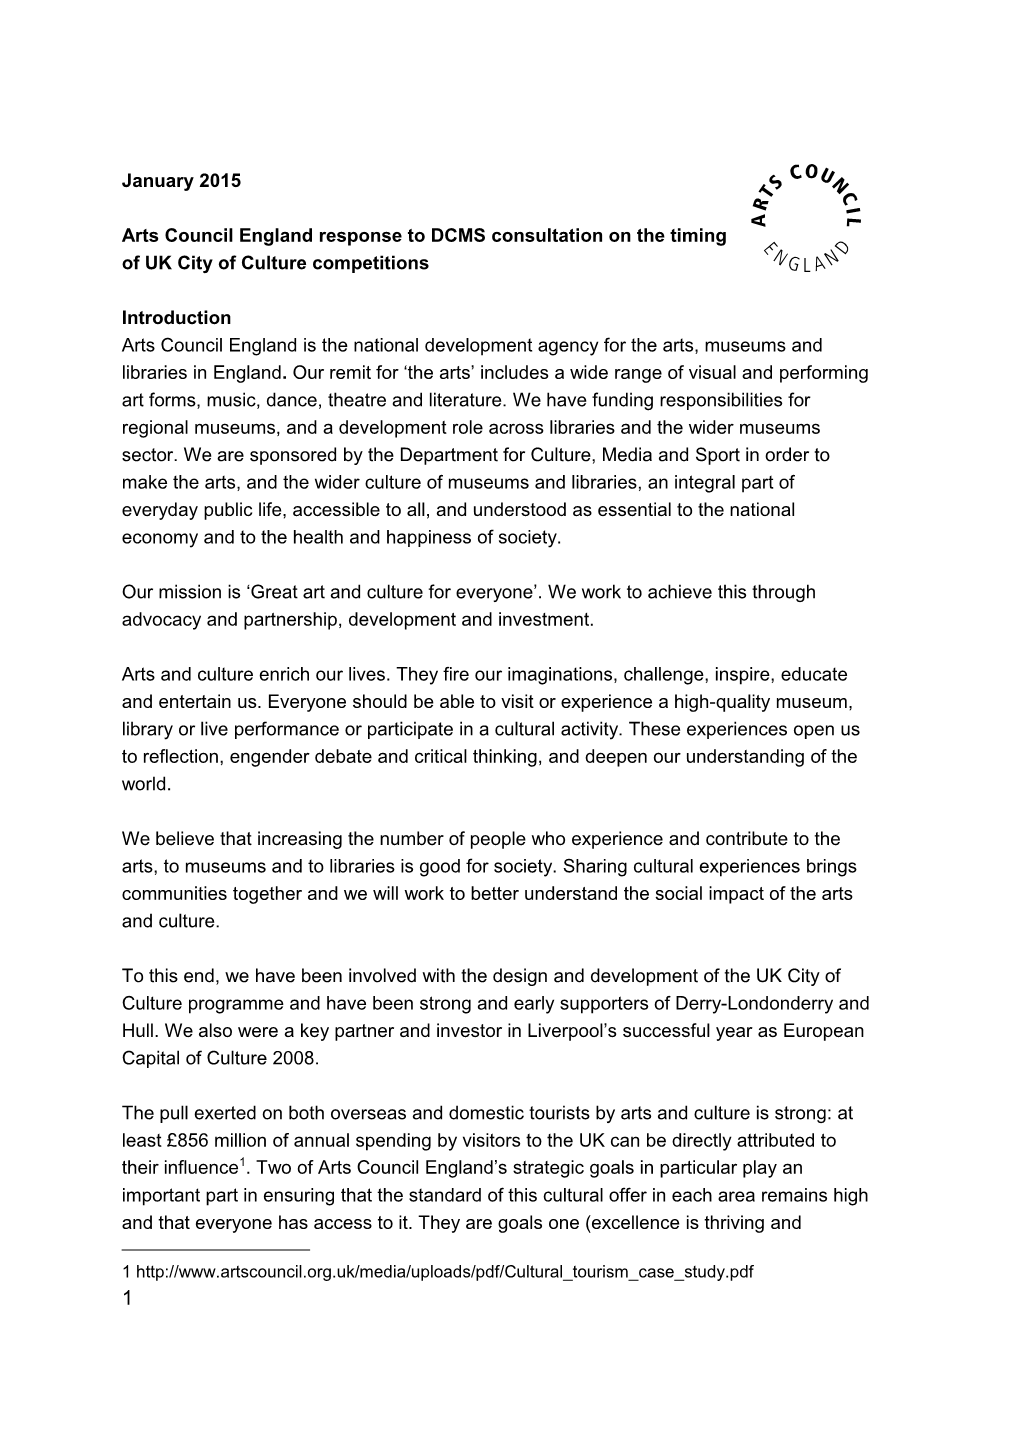 Arts Council England Response to DCMS Consultation on the Timing of UK City of Culture